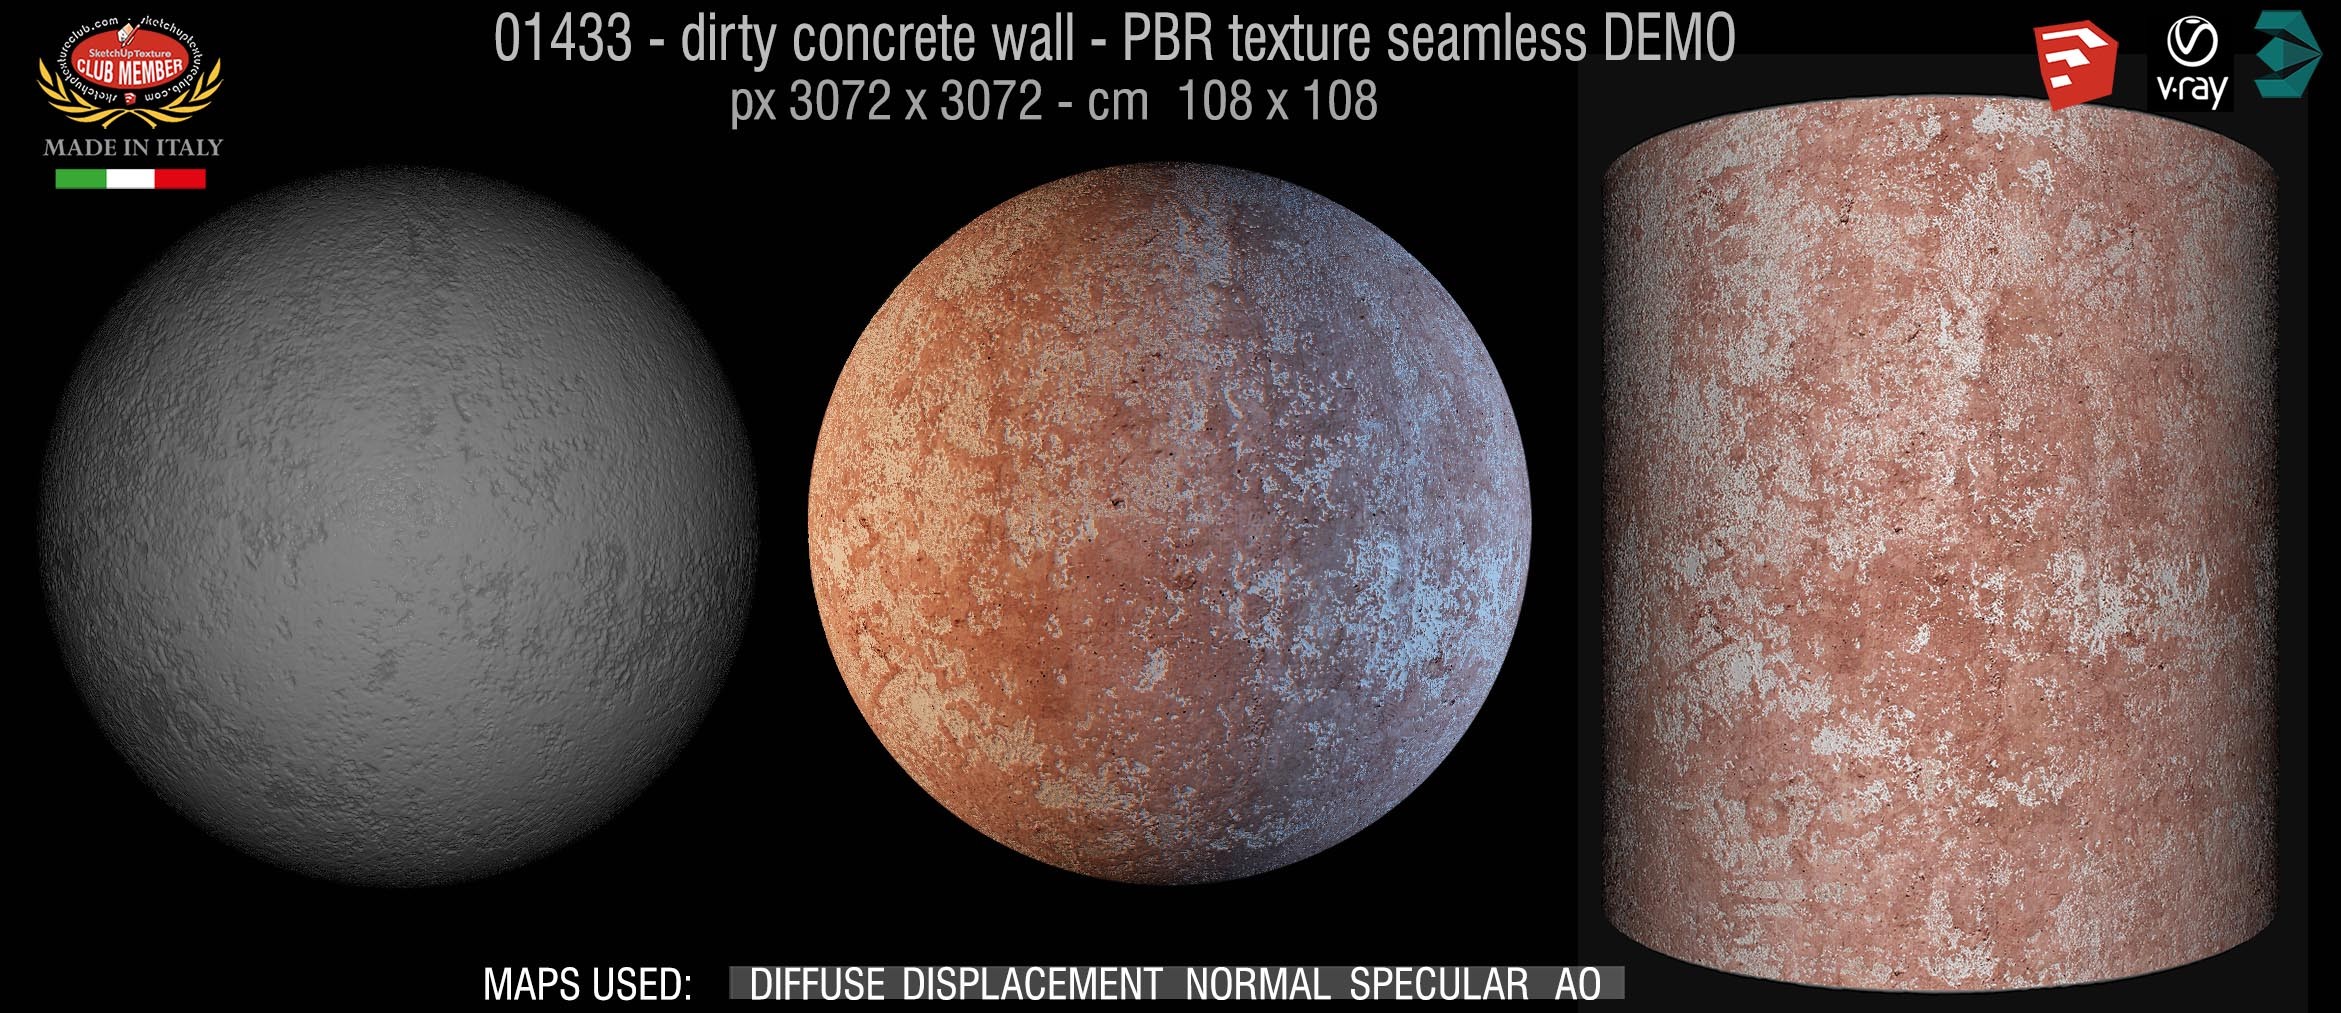 01433 Concrete bare dirty wall PBR texture seamless DEMO